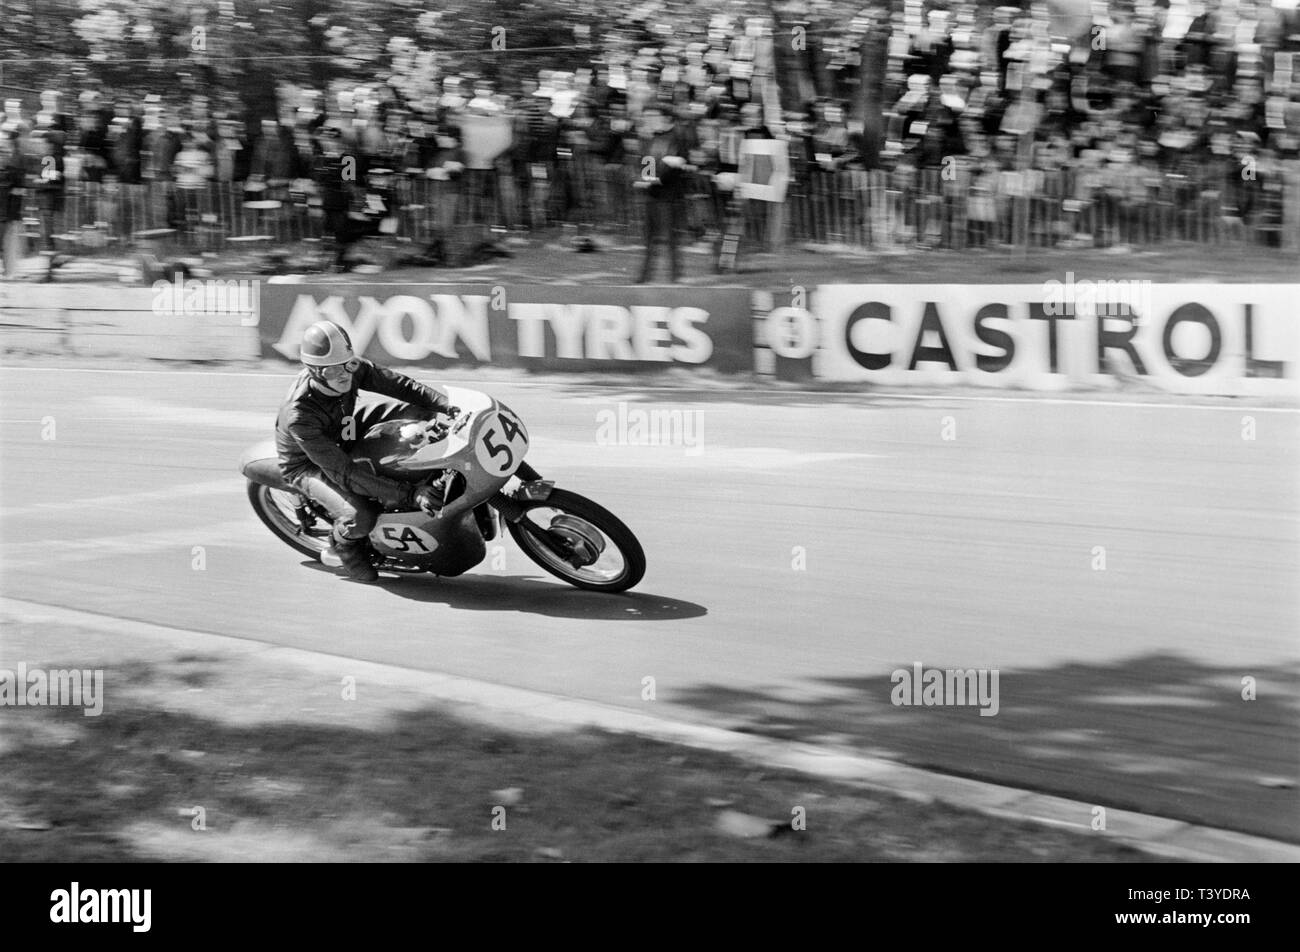 Motorcycle racing at Crystal Palace near London in 1968. A motorcycle racer, number 54, approaching in to a bend on the track. The Crystal Palace racing circuit was closed in 1972. Stock Photo